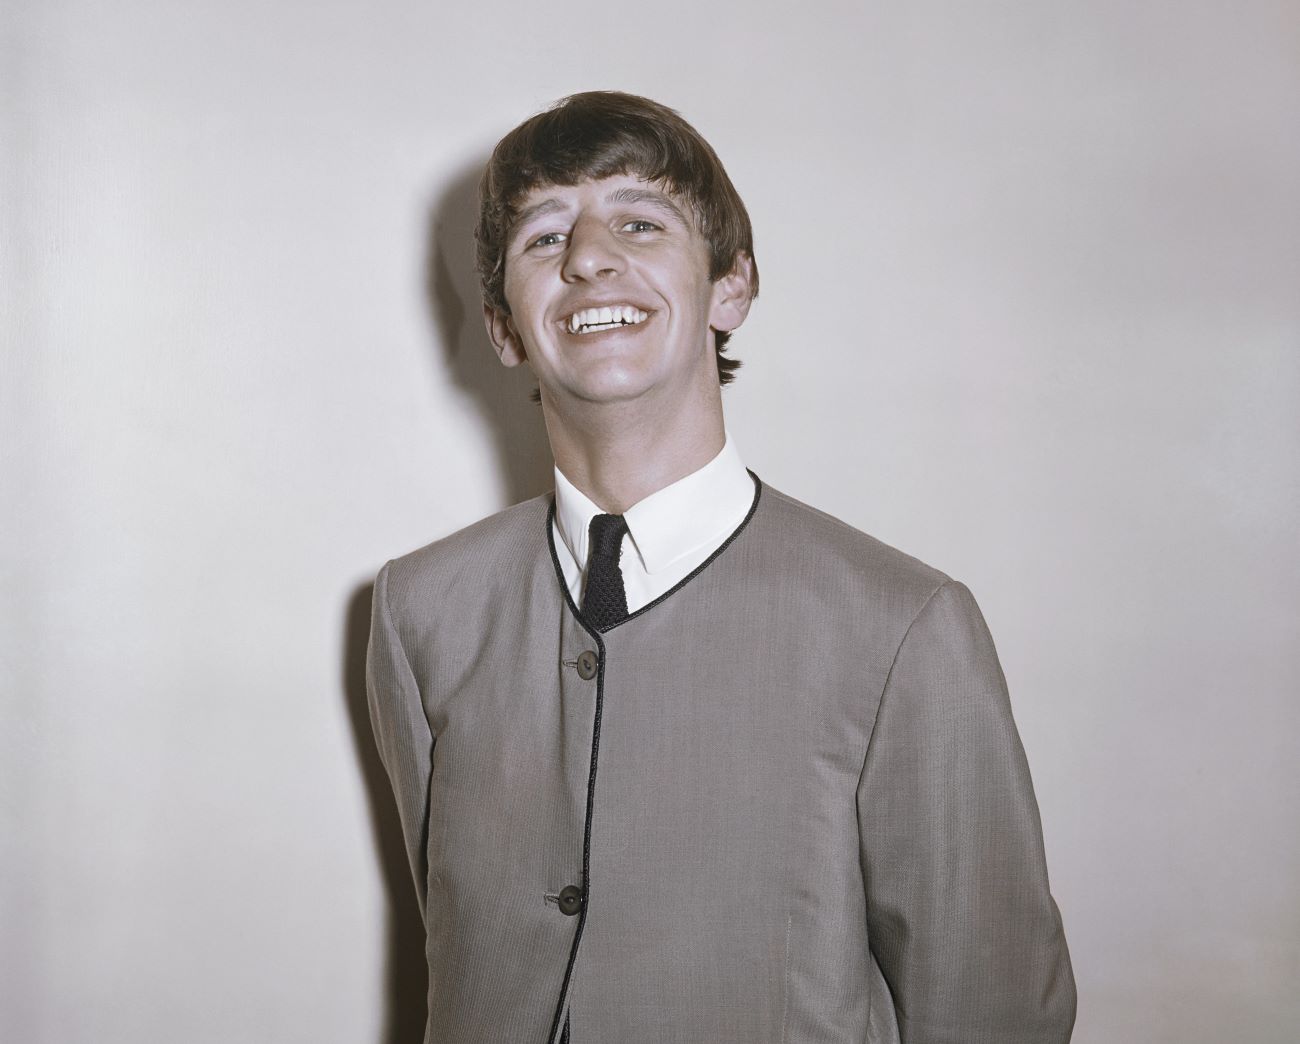 Ringo Starr wears a jacket and tie against a gray background. 